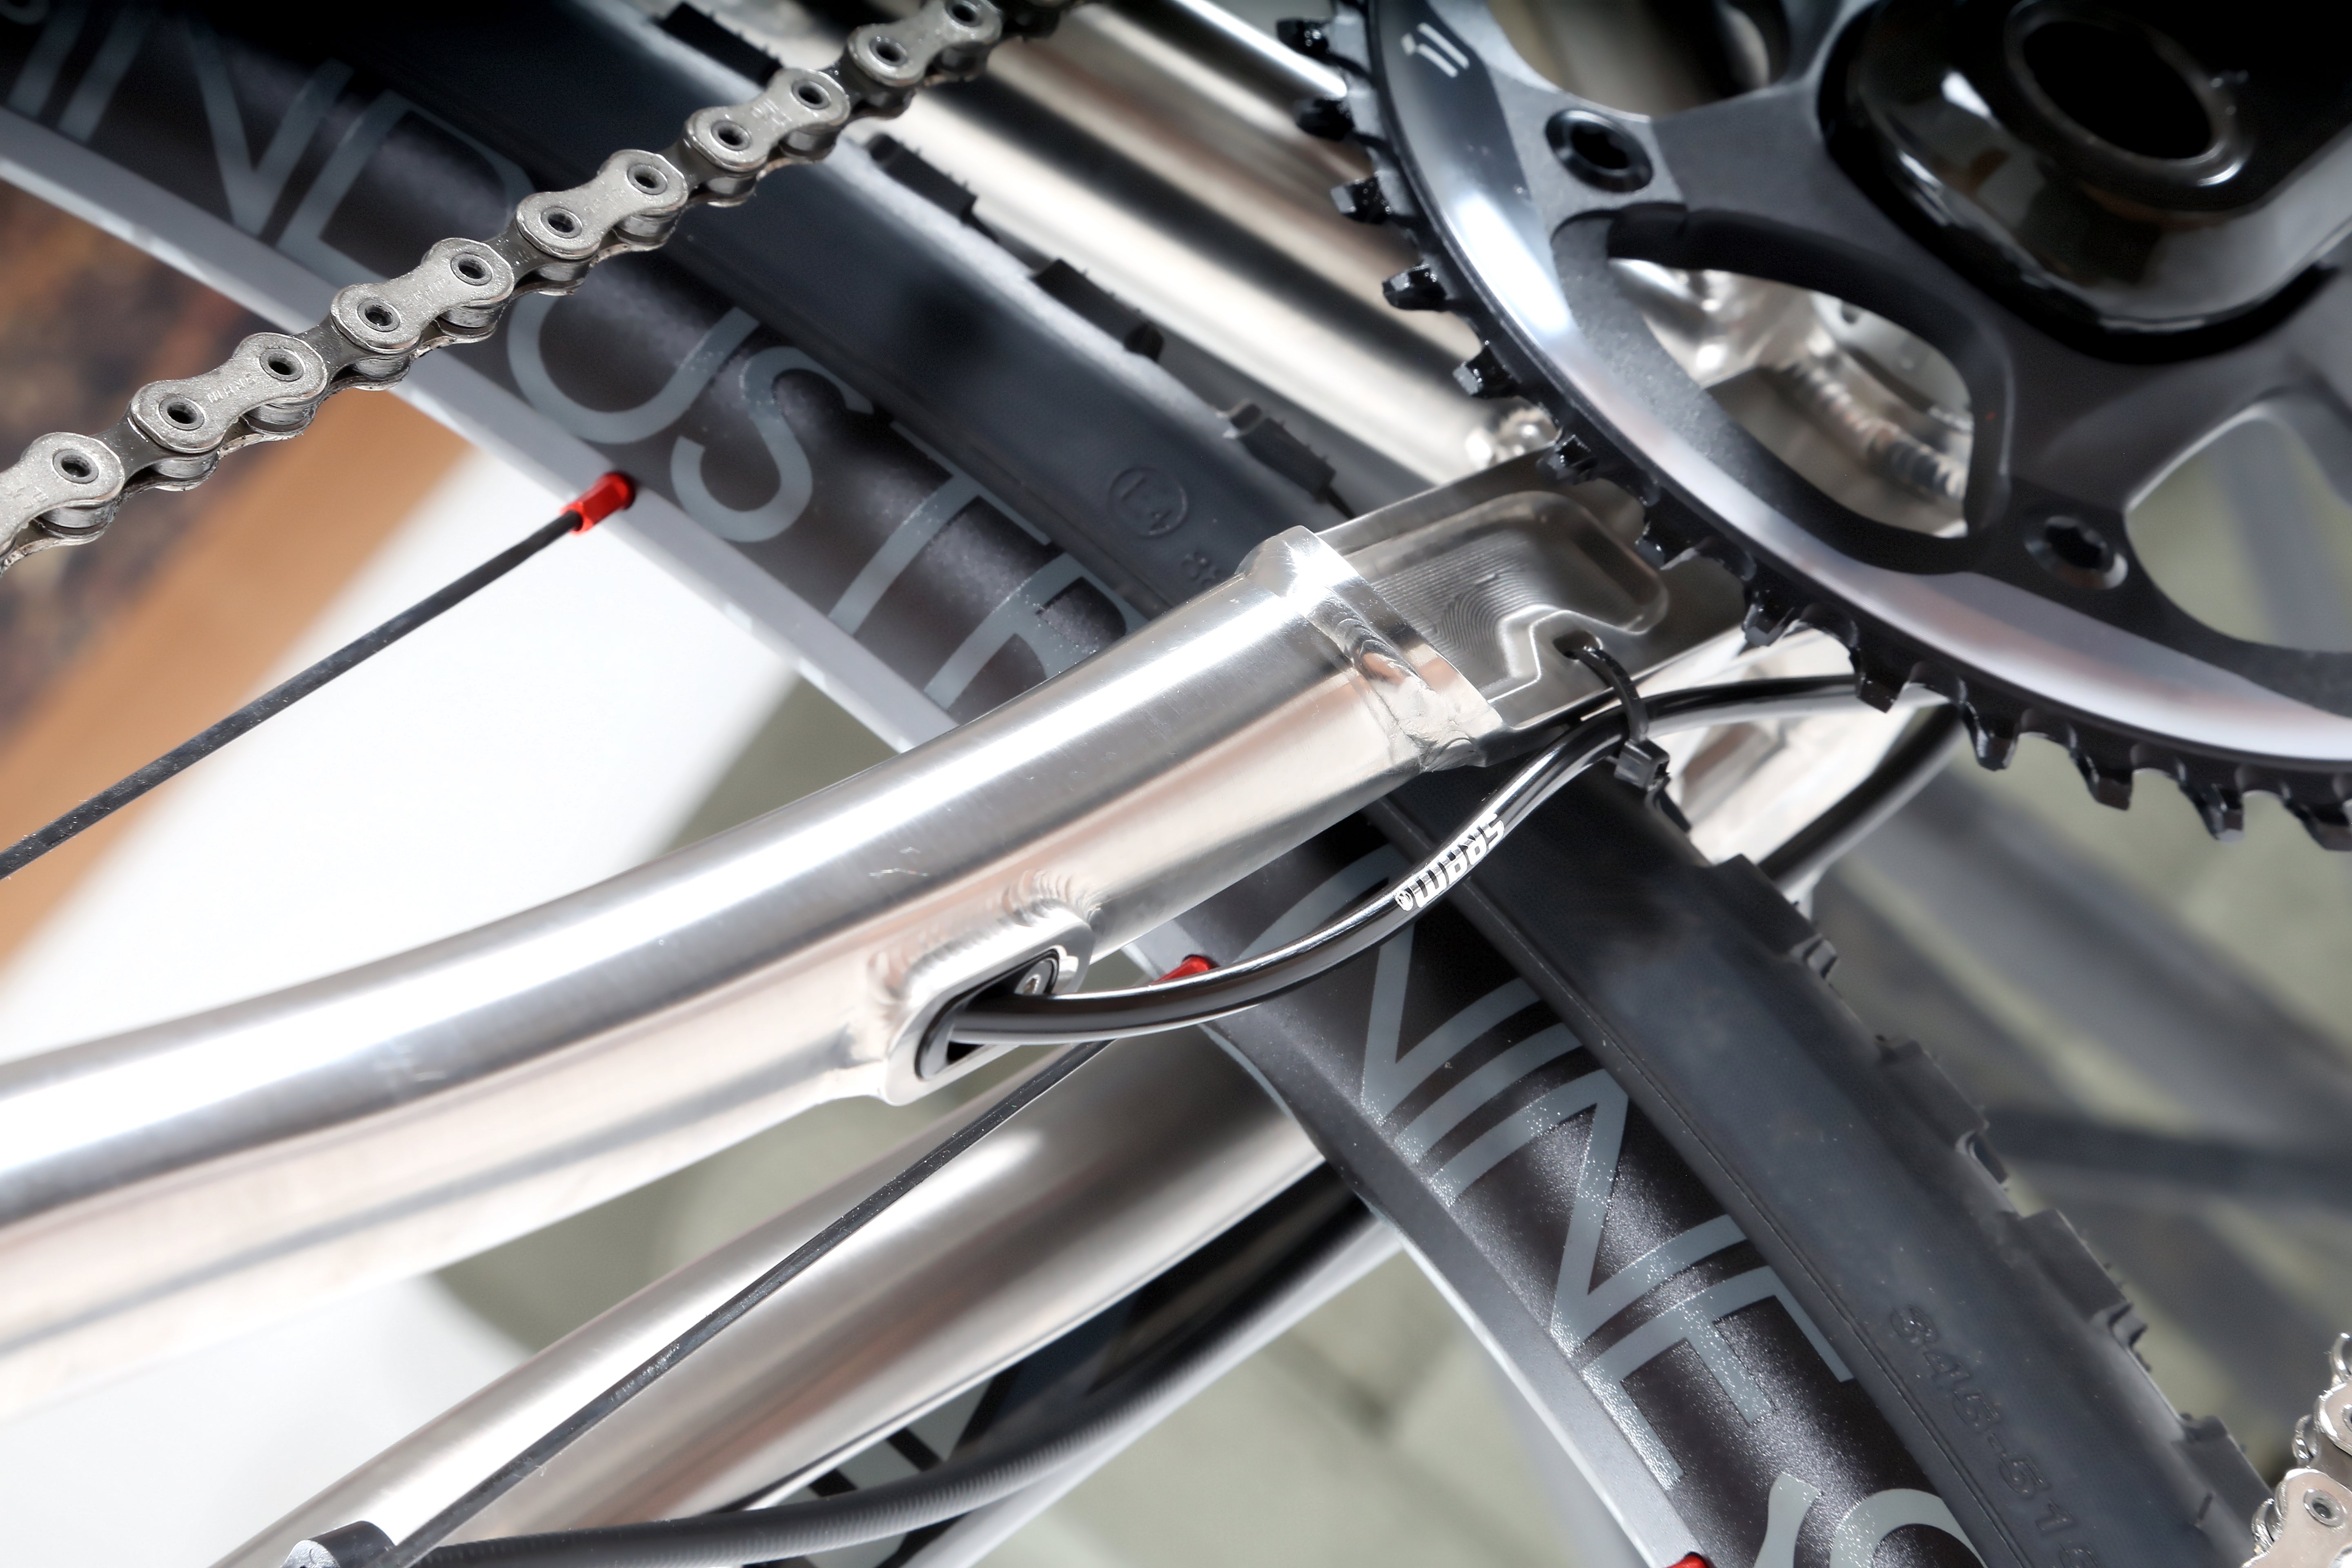 Knolly Cache chainstay details